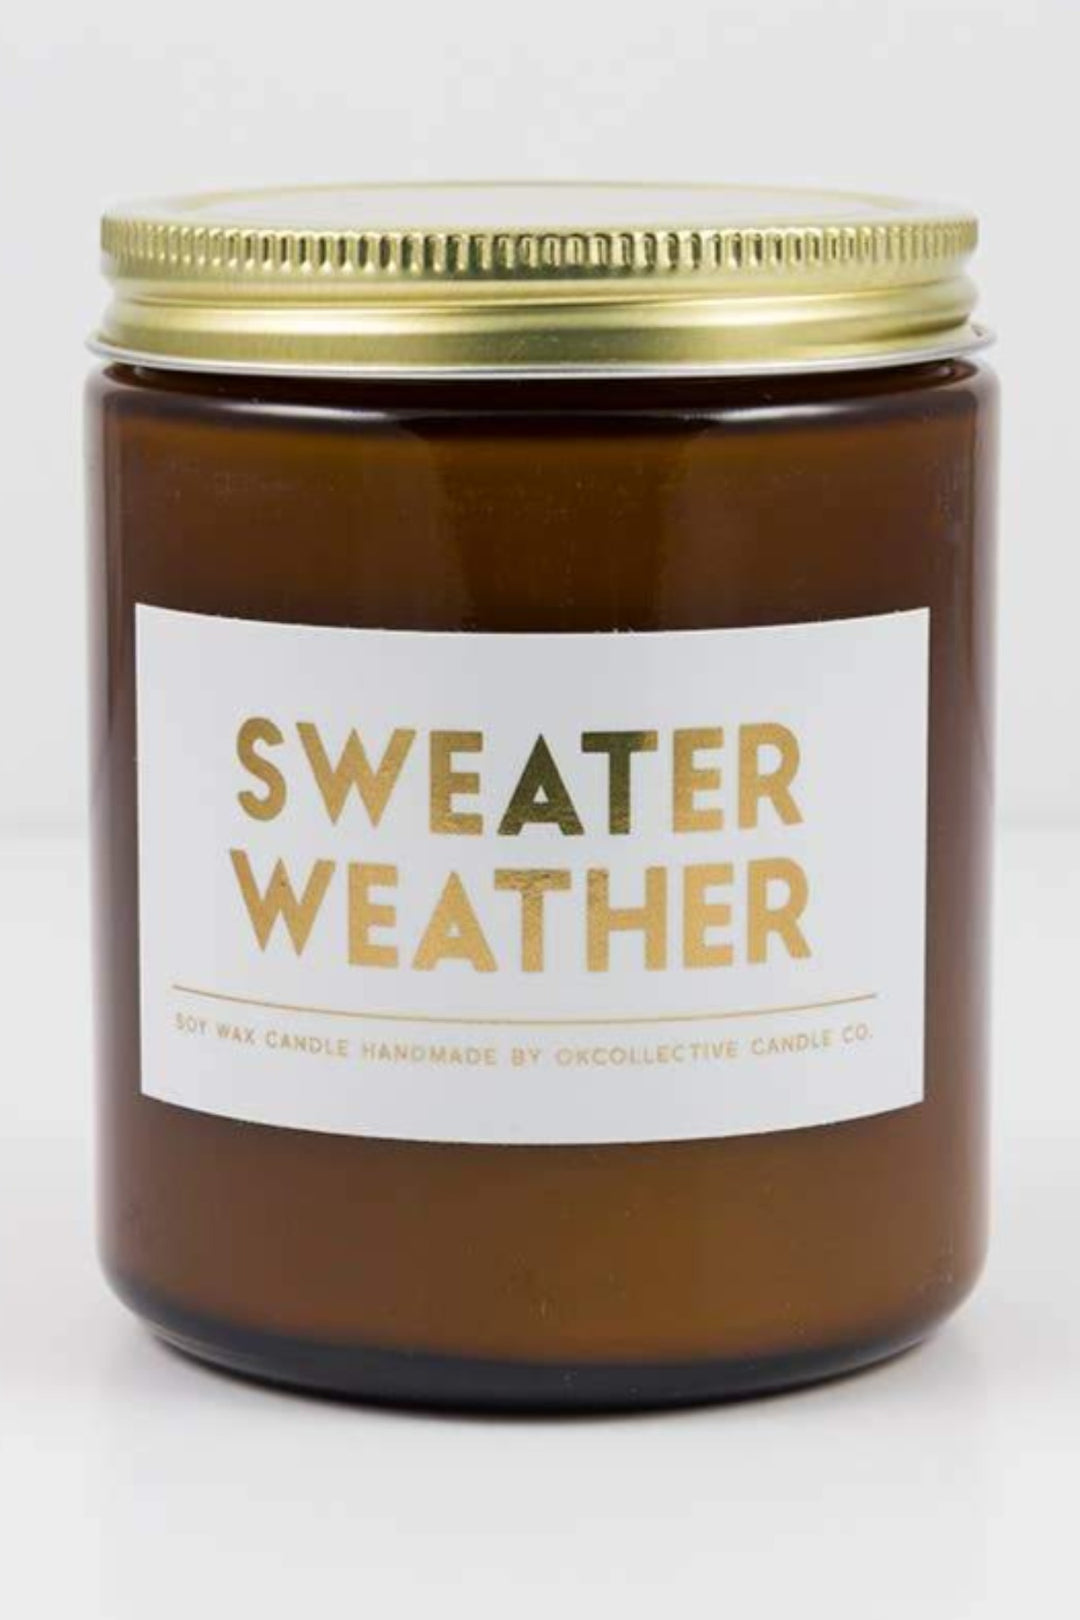 SWEATER WEATHER HOLIDAY Soy Candle - 8oz. OKcollective Candle Co. JAYDEN P BOUTIQUE